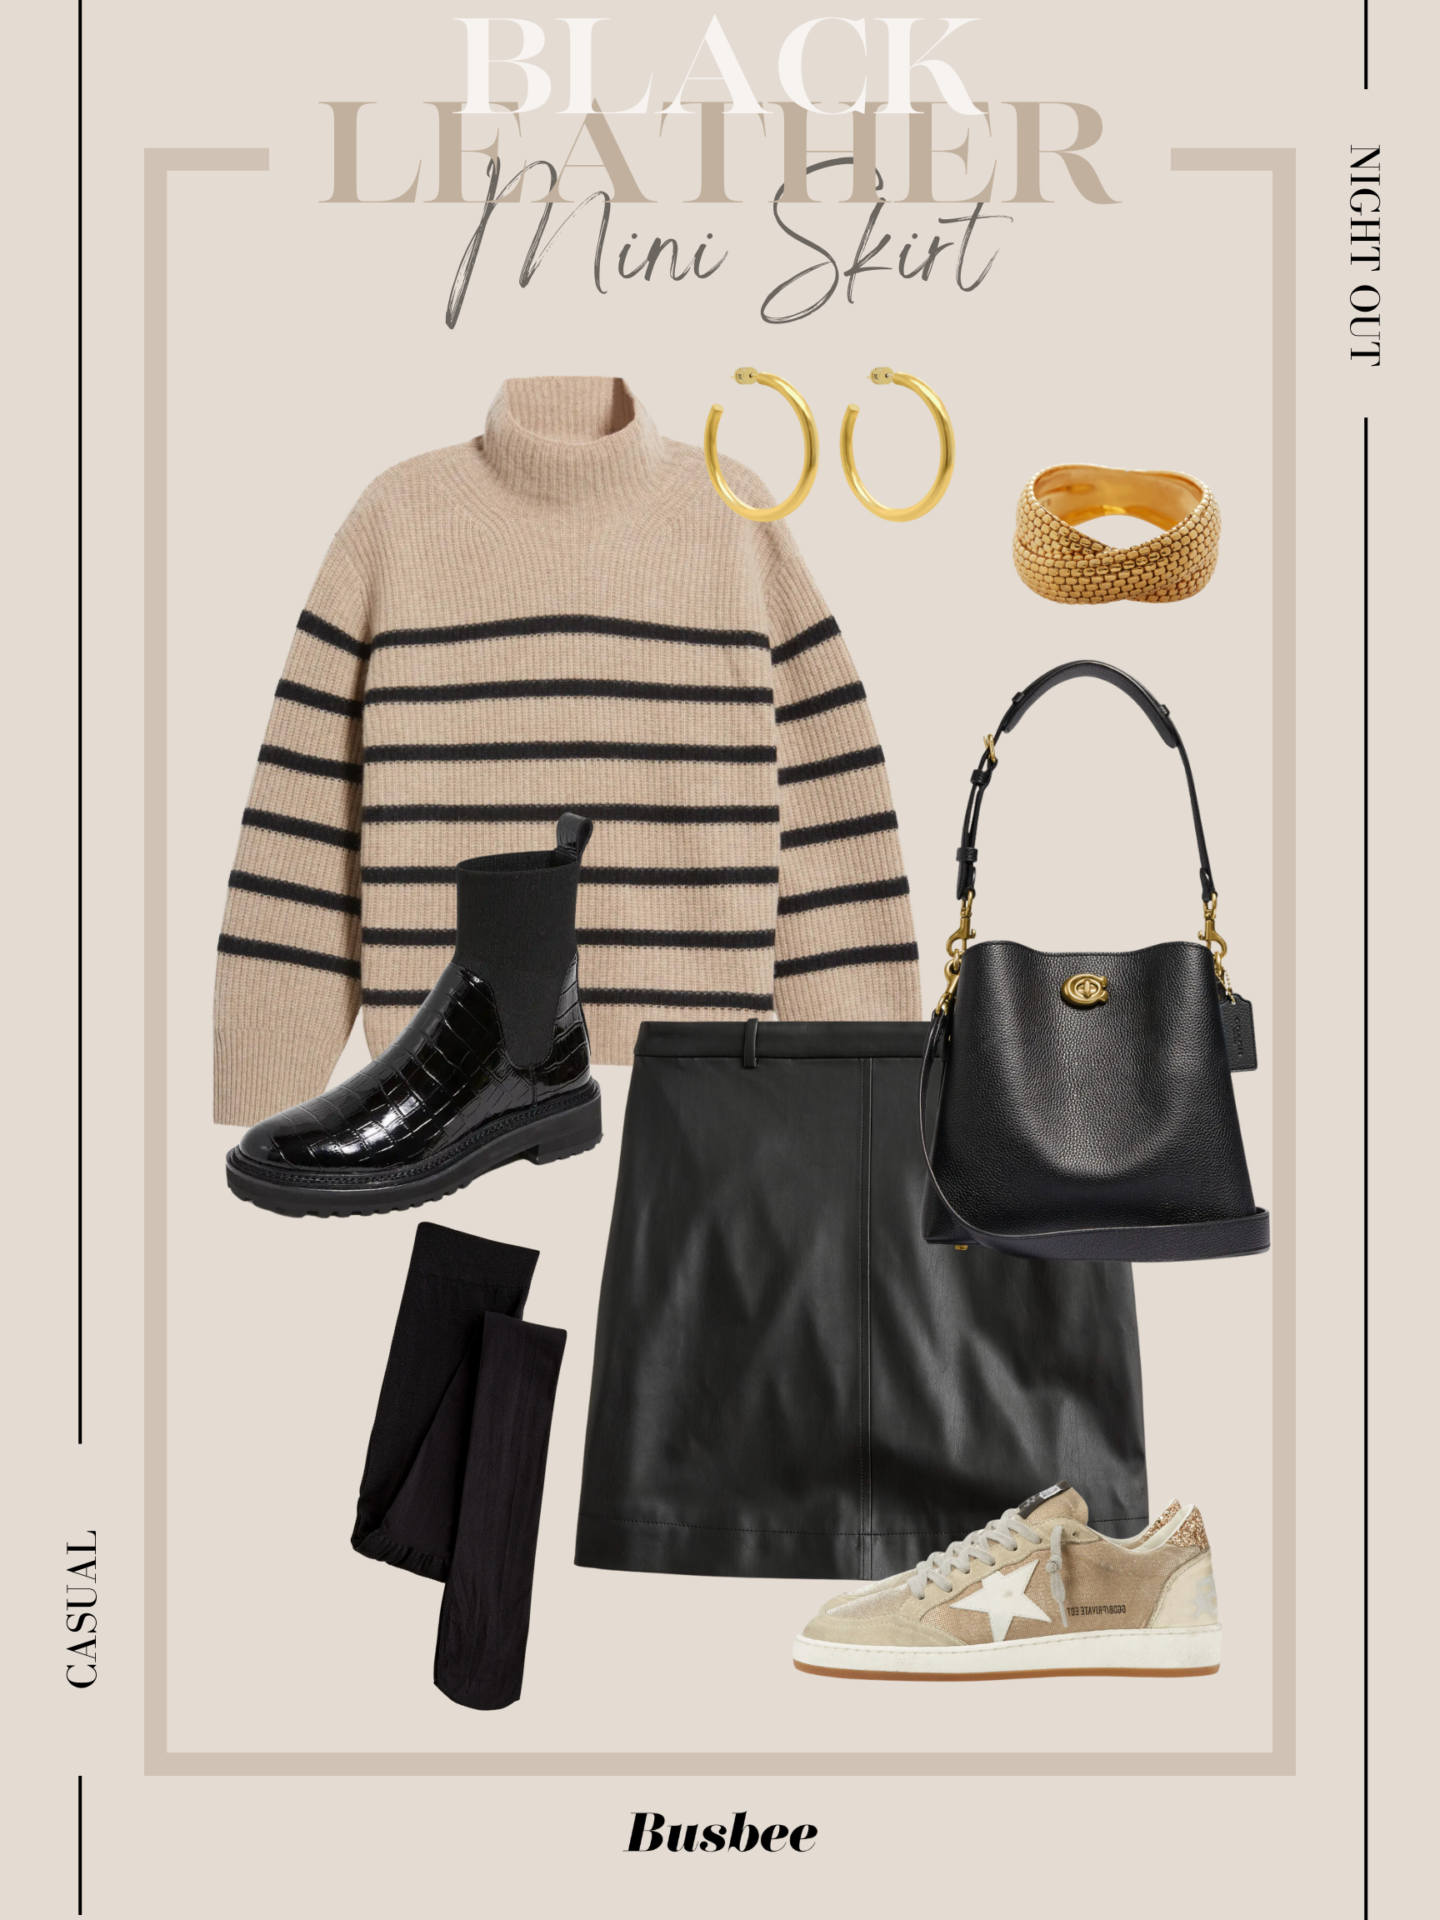 Mini Skirt with Leggings Casual Fall Outfits (2 ideas & outfits